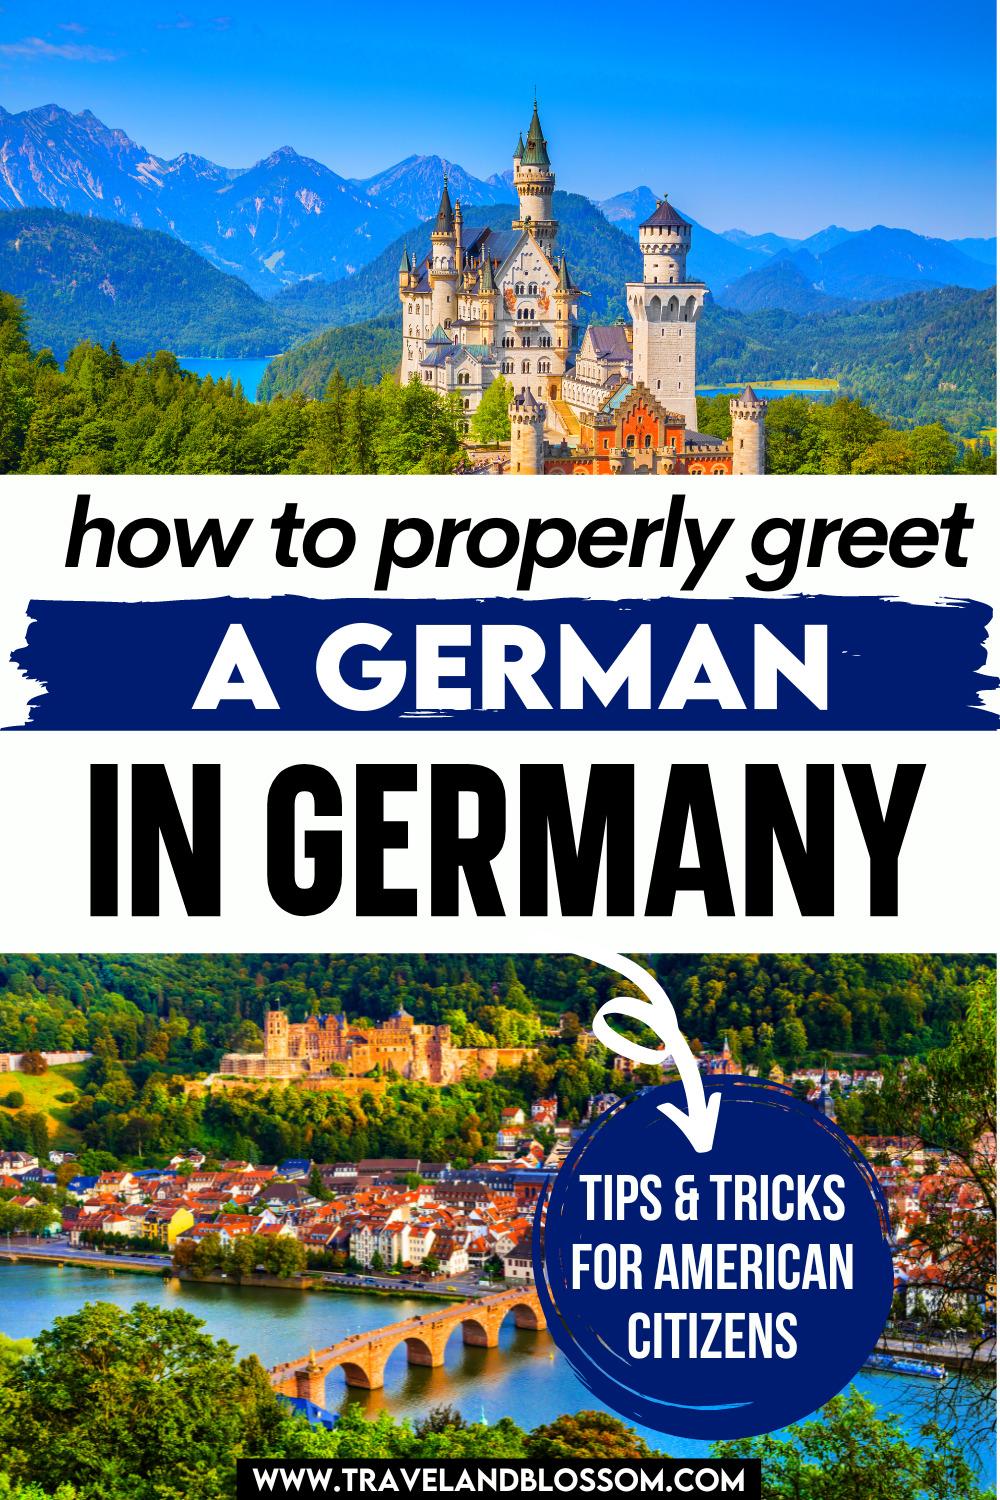 The 10 Most Common German Greetings and Introductions